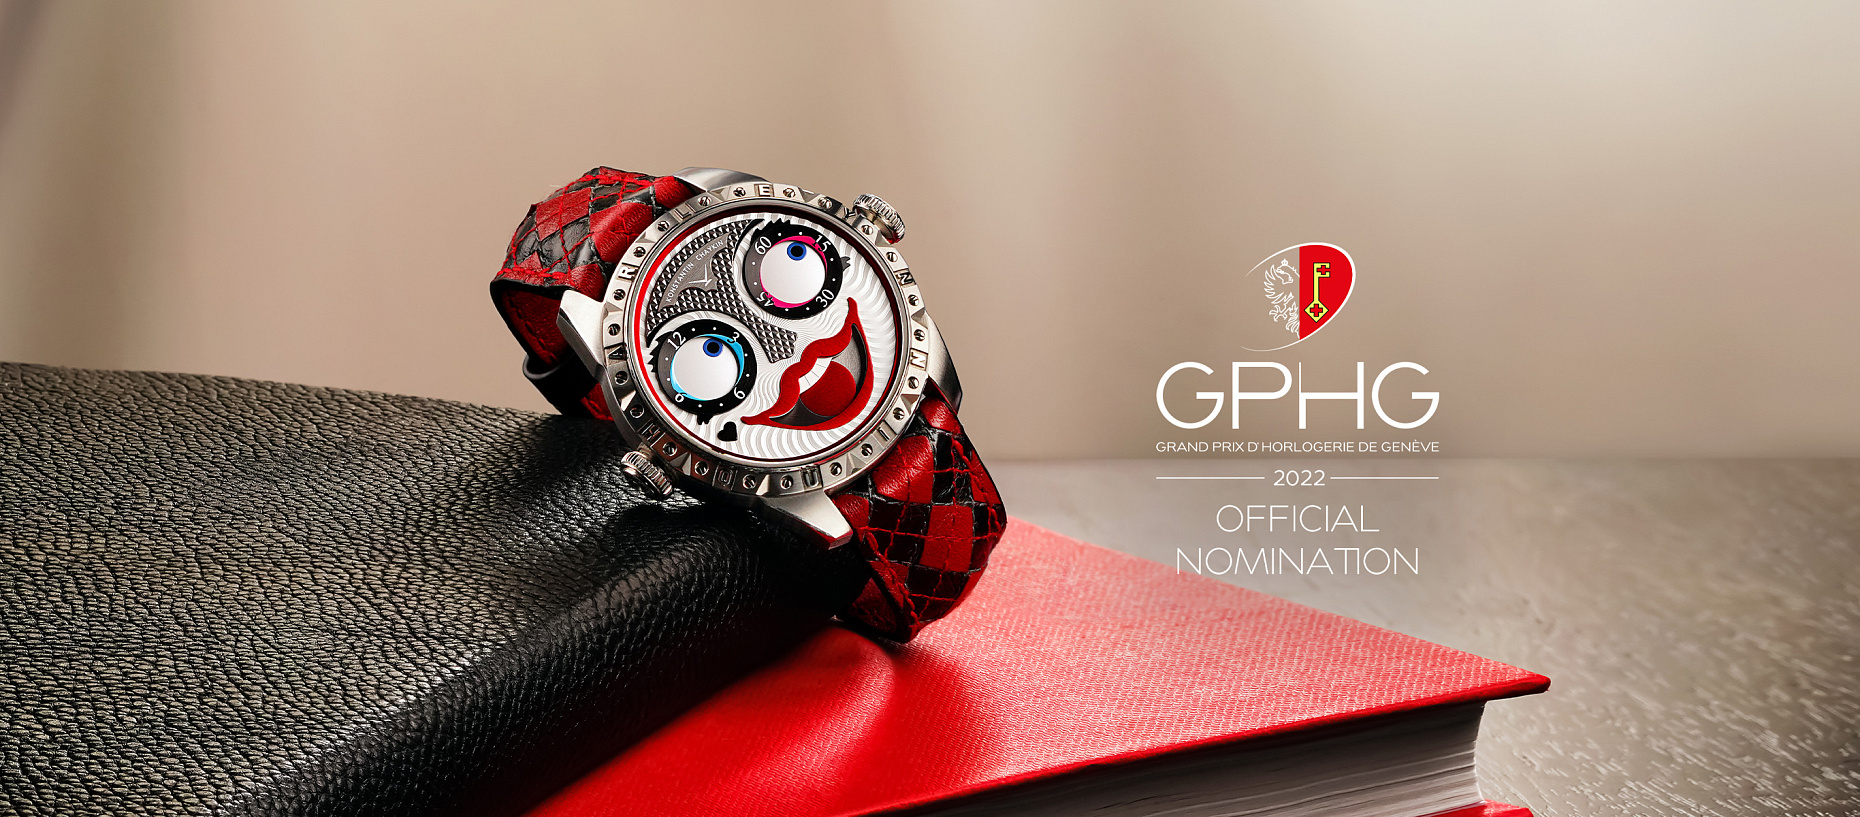 The Harley Queen watch&lt;br&gt; is one of the nominees&lt;br&gt; for the GPHG 2022 Awards